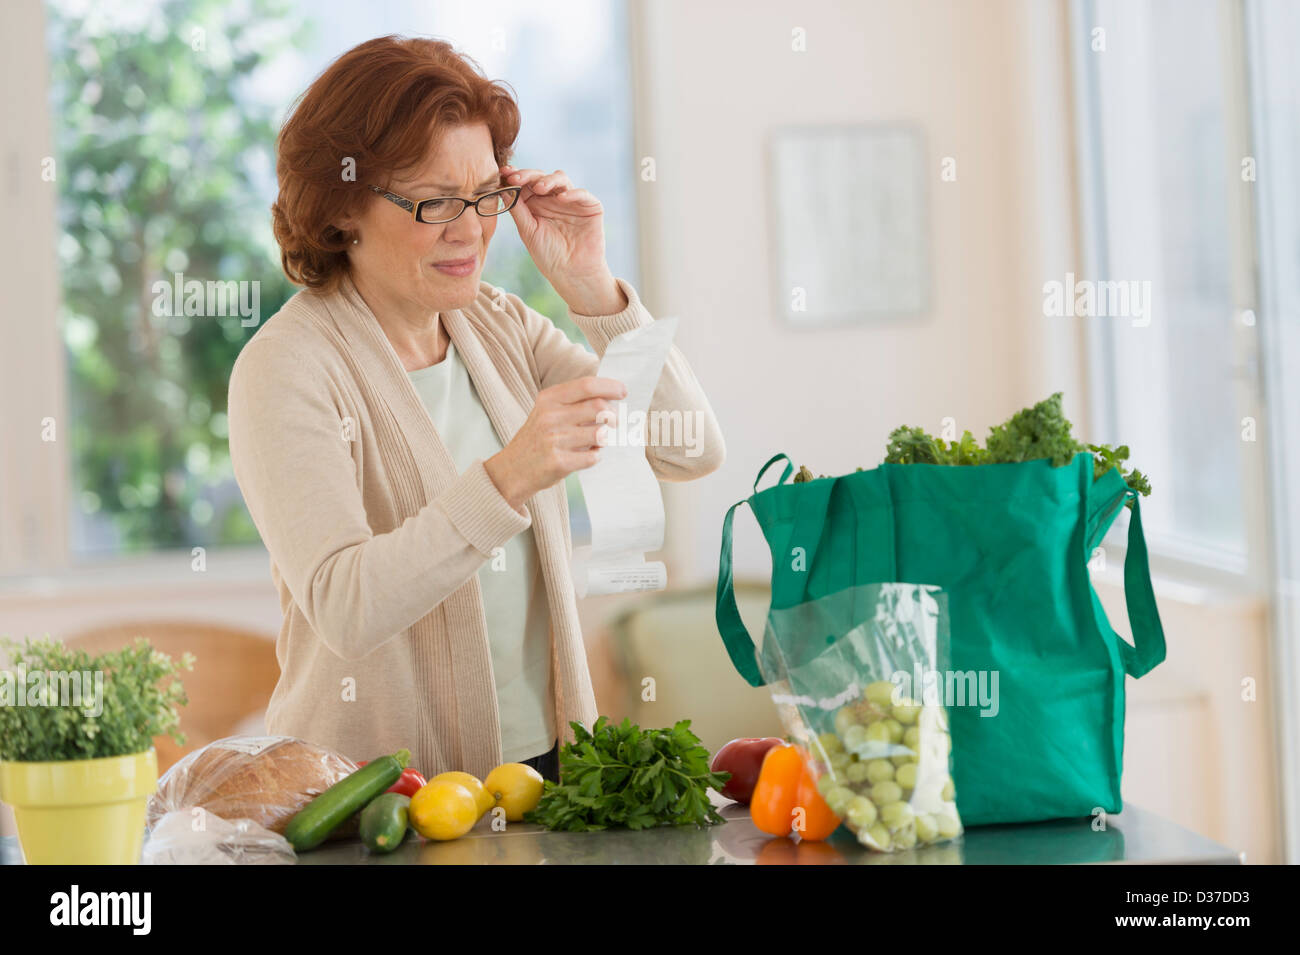 USA, New Jersey, Jersey City, Woman reading shopping list in kitchen Stock Photo